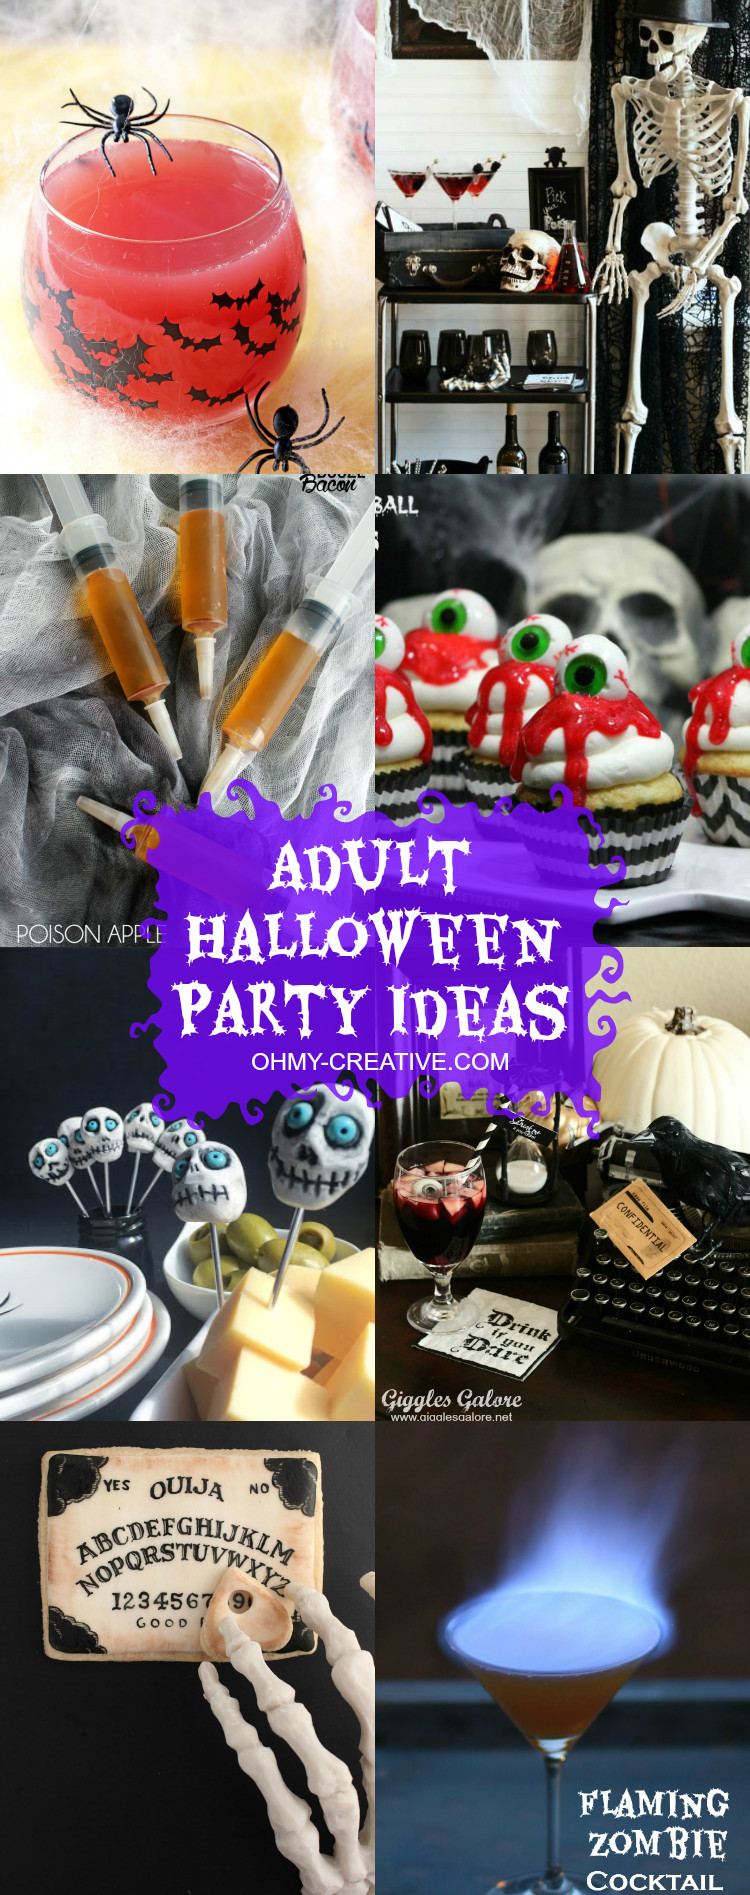 Halloween Theme Party Ideas For Adults
 Adult Halloween Party Ideas Oh My Creative